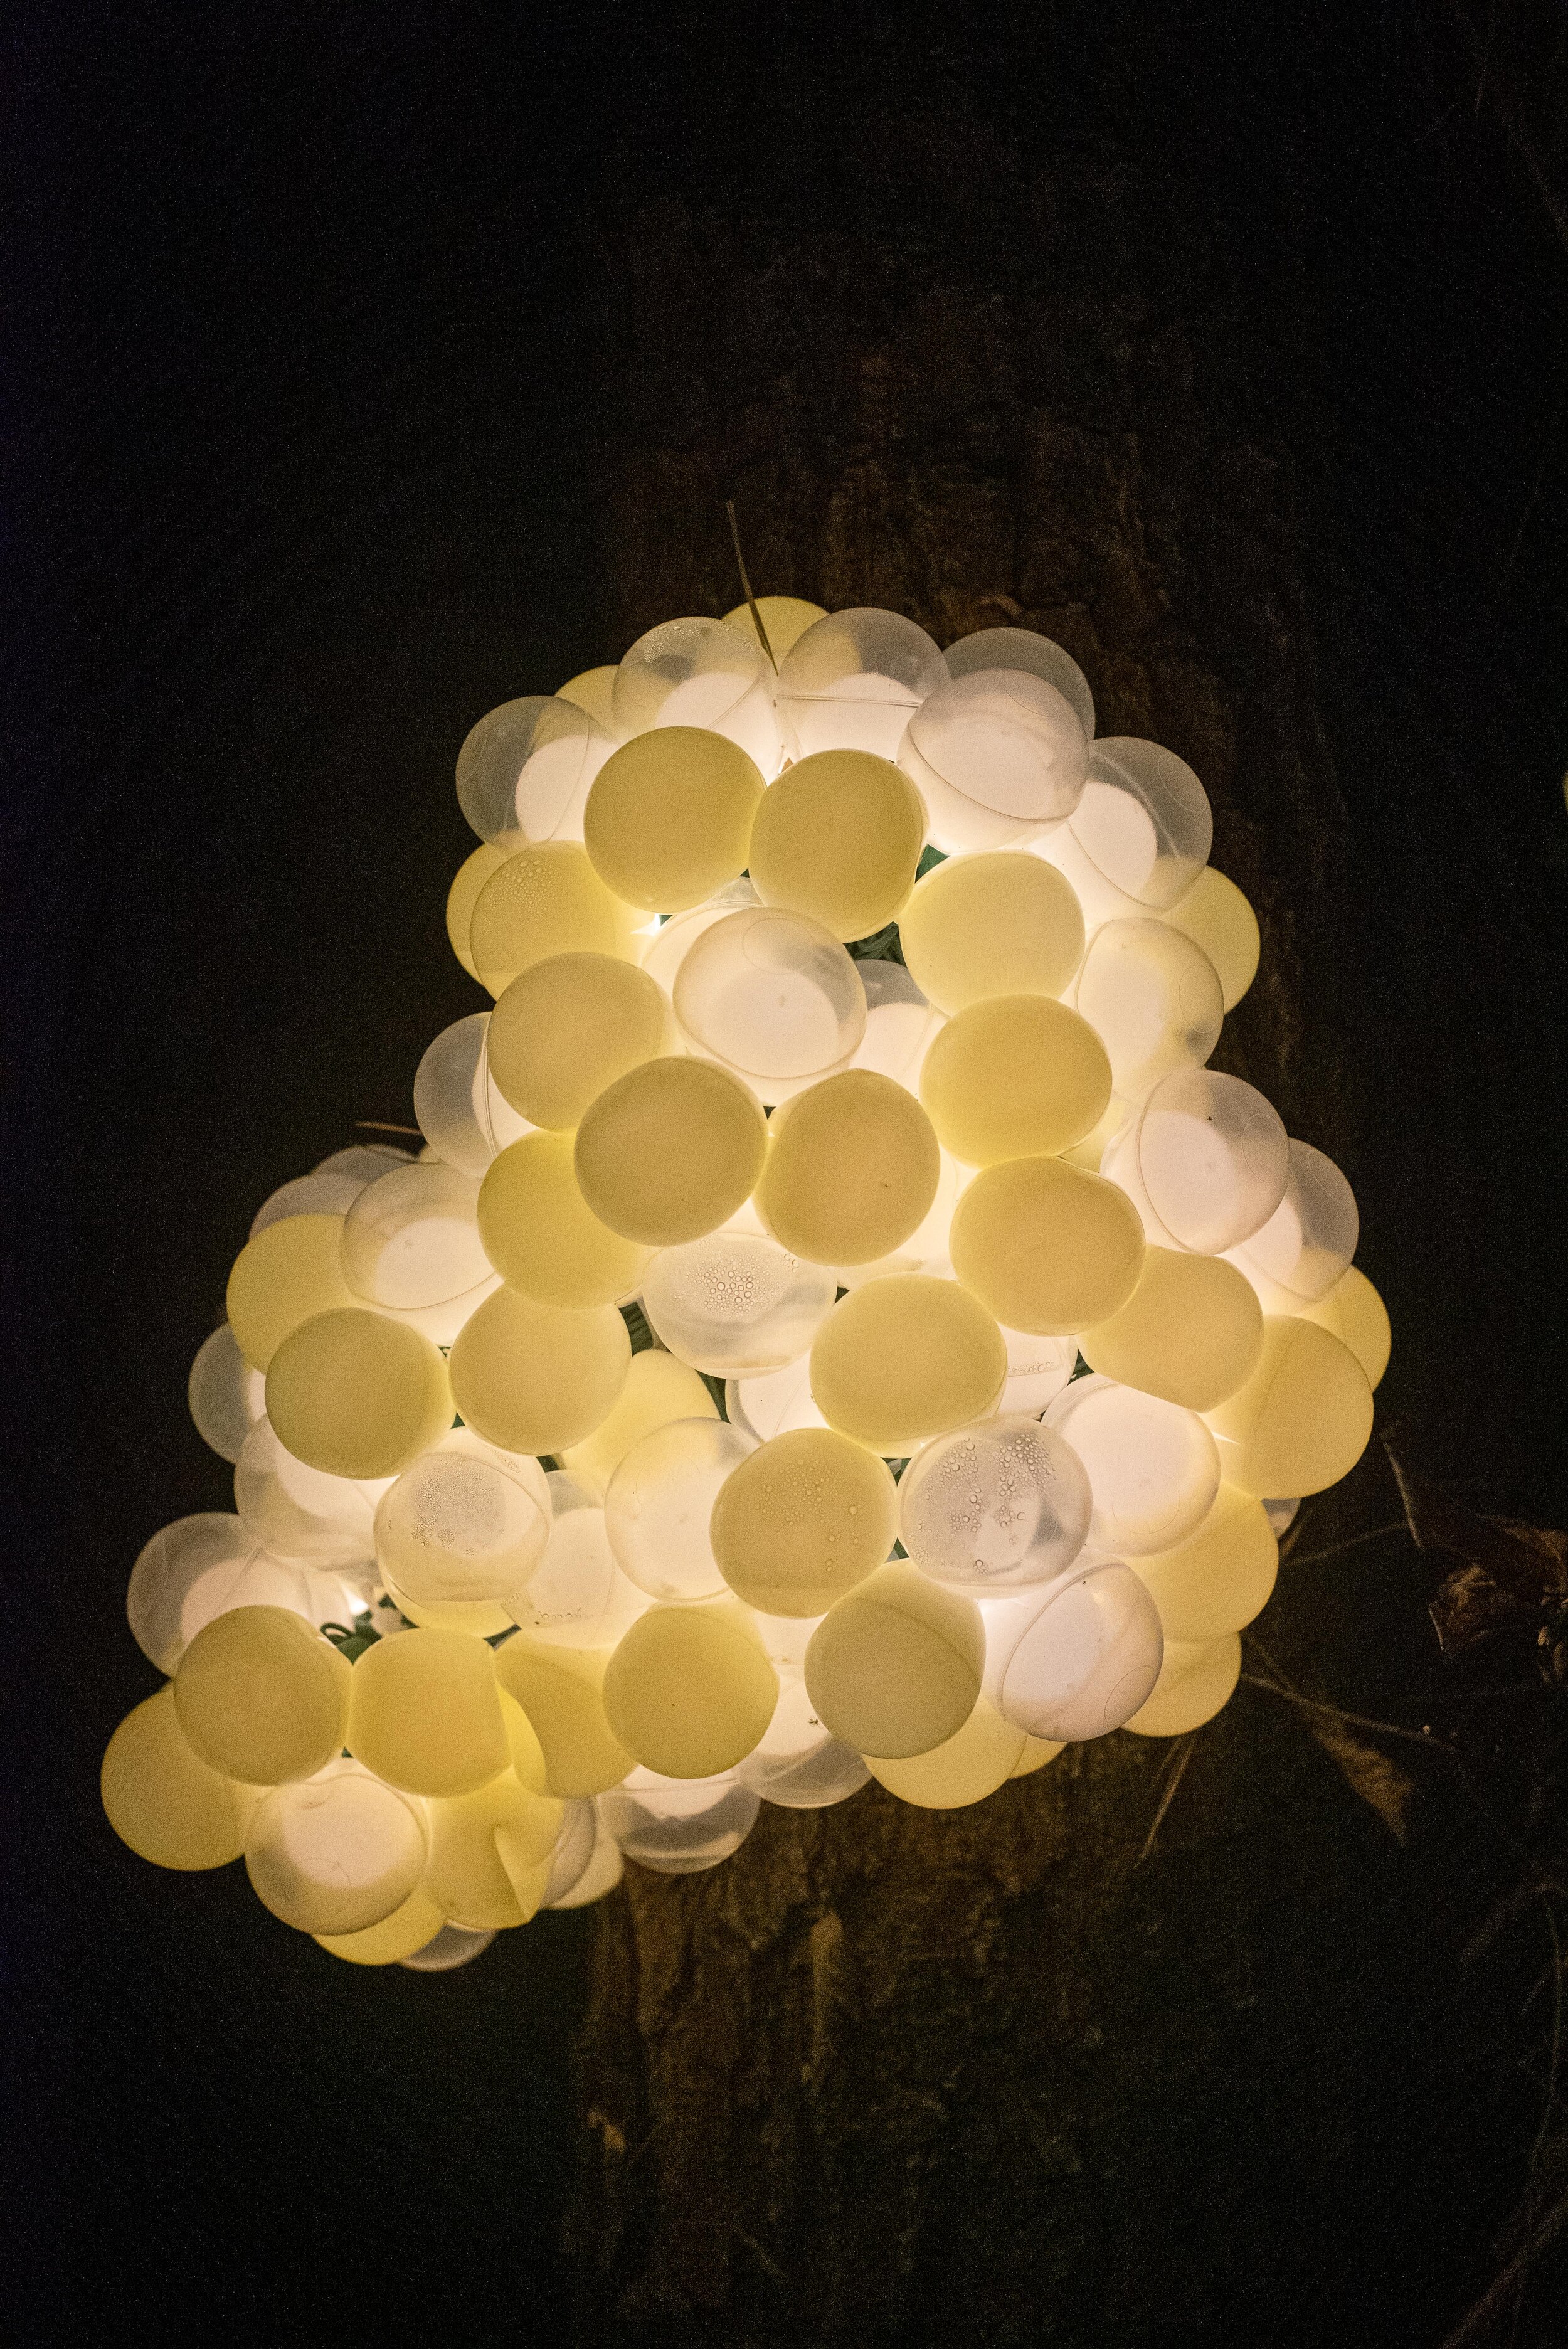 Butterfly Egg, detail of larger temporary site-specific installation